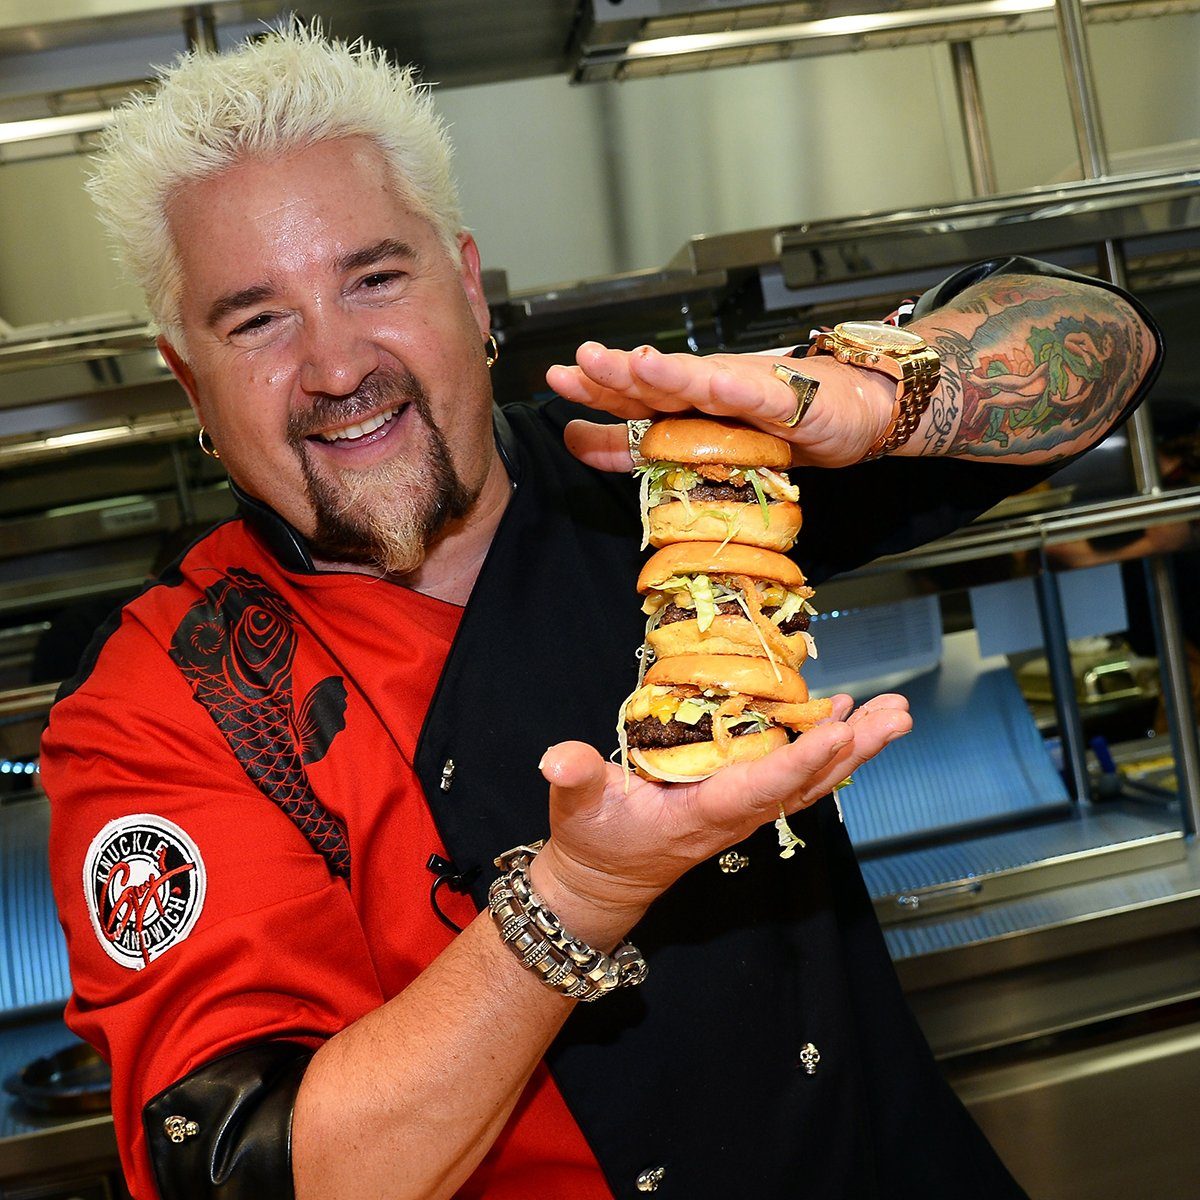 LAS VEGAS, NV - APRIL 04: Chef and television personality Guy Fieri holds hamburgers in the kitchen during a welcome event for Guy Fieri's Vegas Kitchen & Bar at The Quad Resort & Casino on April 4, 2014 in Las Vegas, Nevada. The restaurant opens on April 17. (Photo by Ethan Miller/Getty Images for Caesars Entertainment)